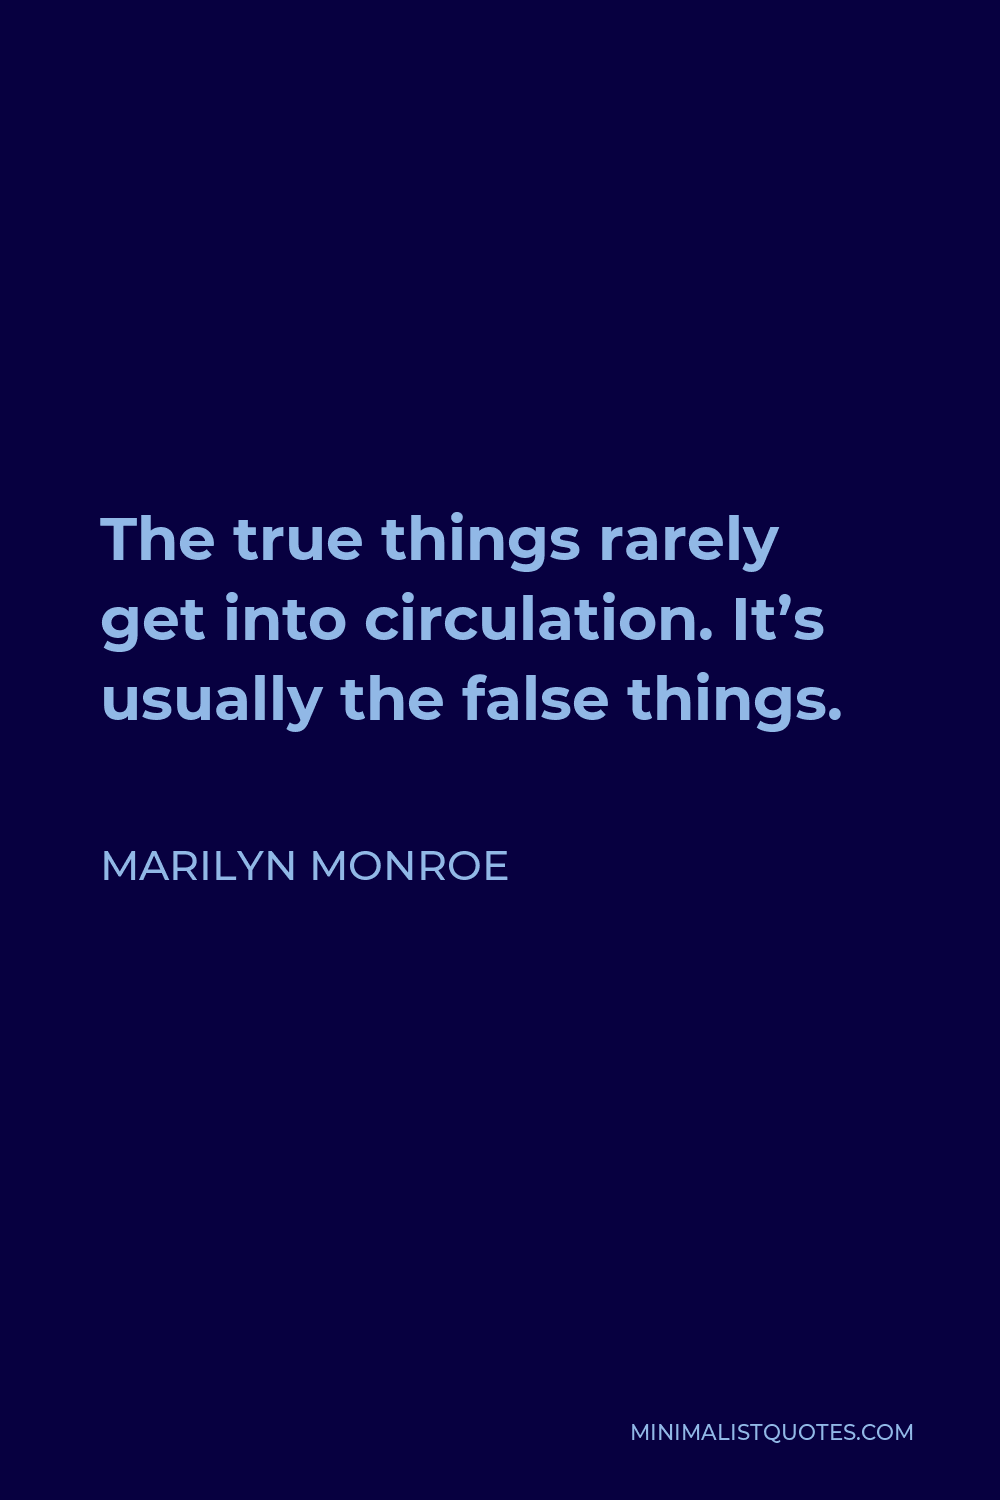 Marilyn Monroe Quote - The true things rarely get into circulation. It’s usually the false things.